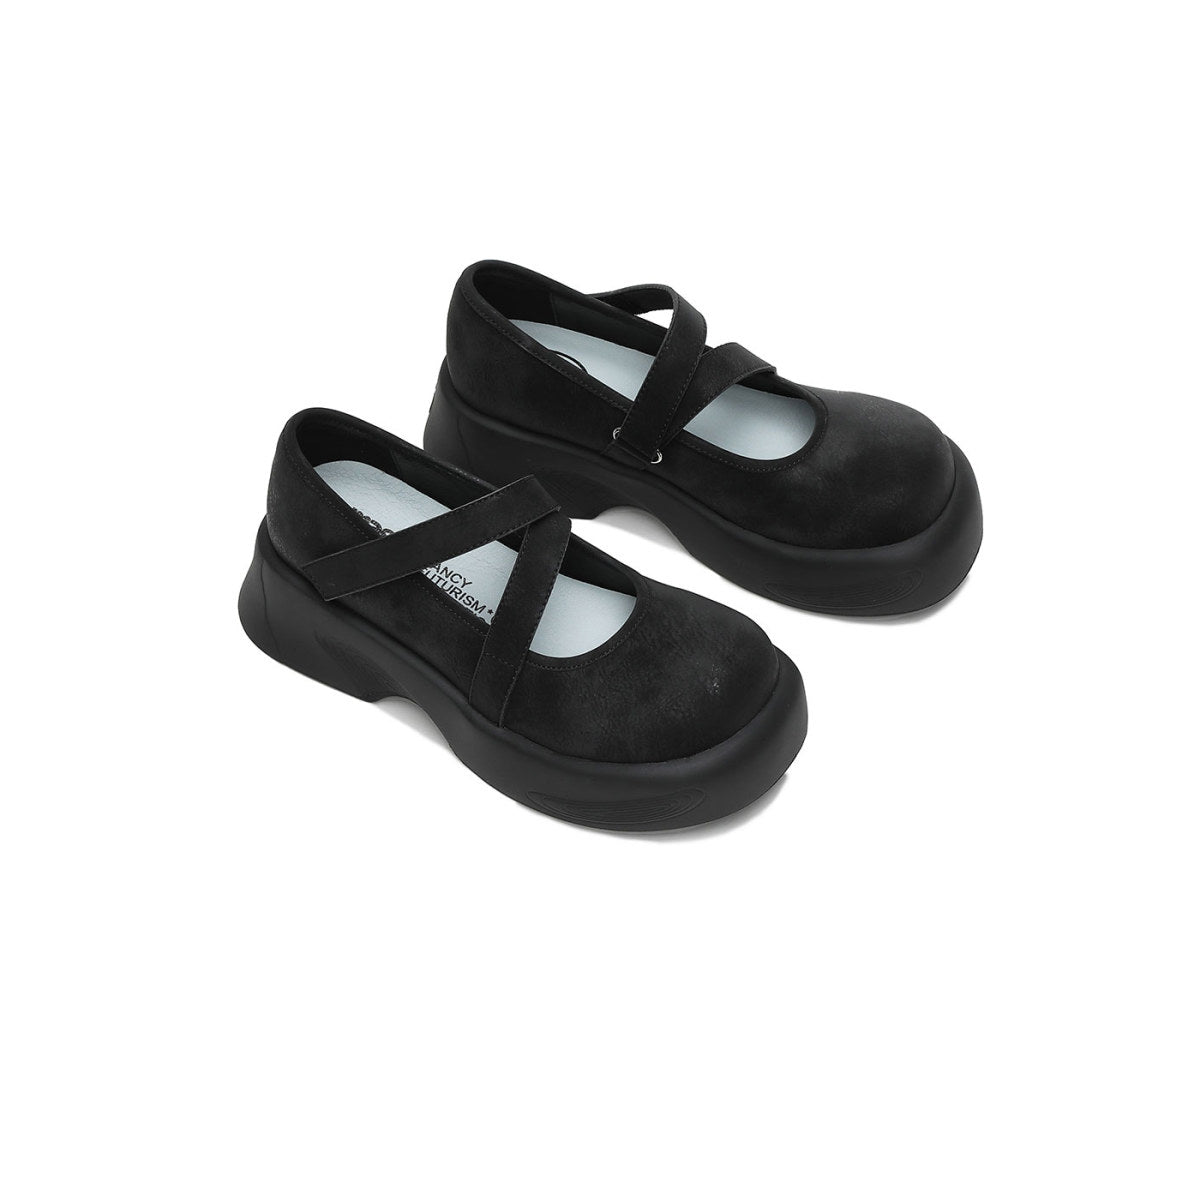 Casey Black Mary Jane Casual Shoes